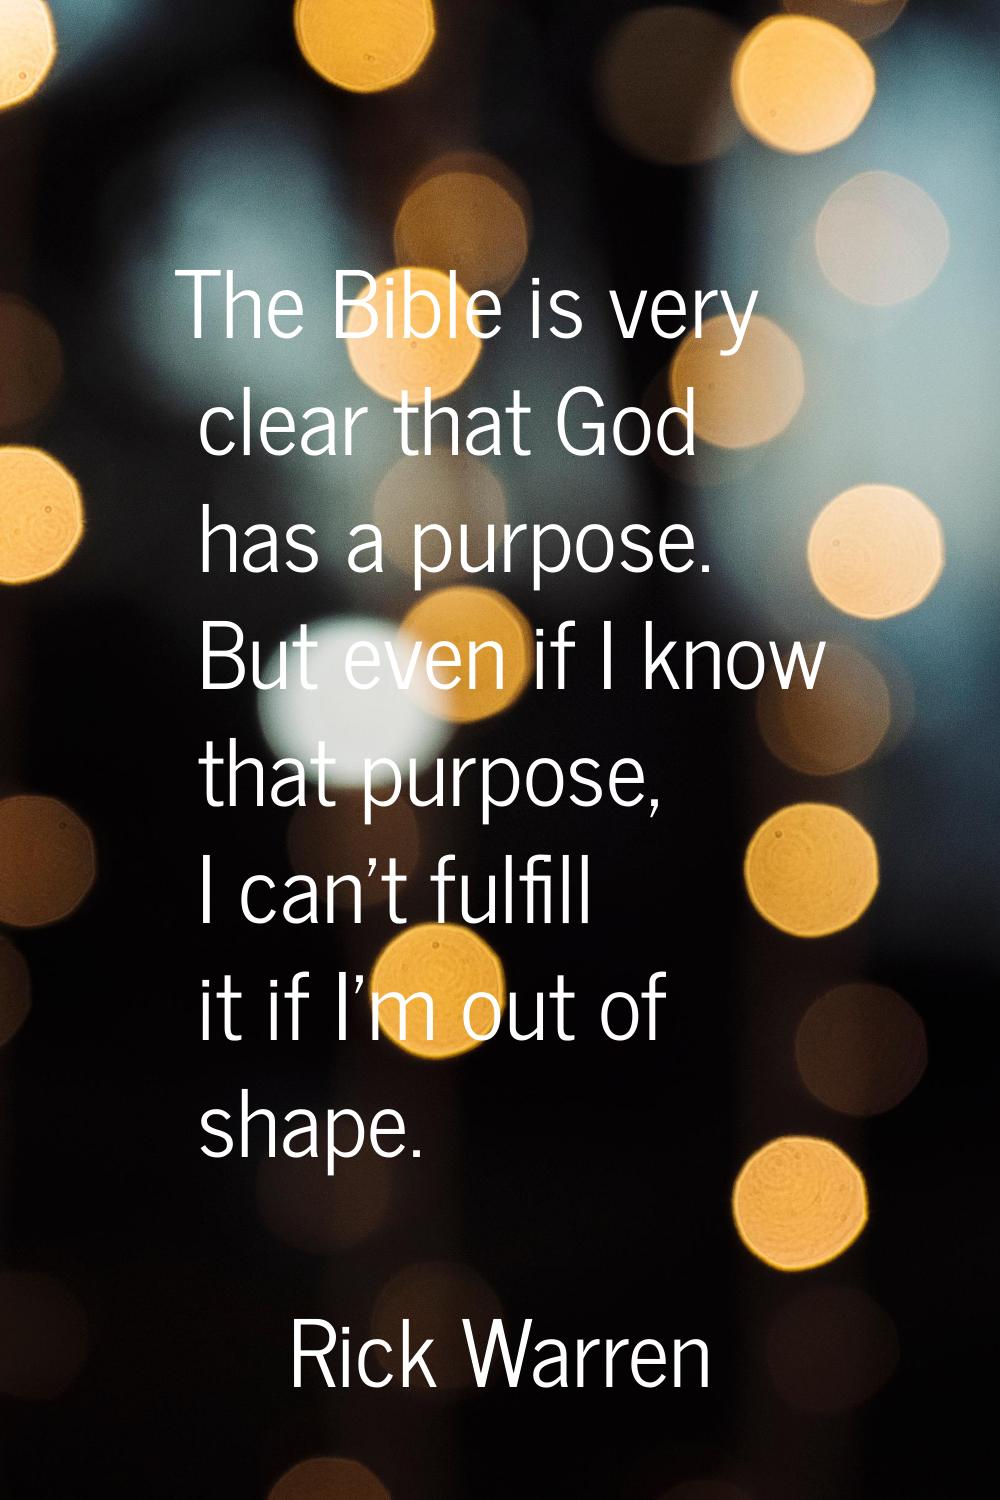 The Bible is very clear that God has a purpose. But even if I know that purpose, I can't fulfill it